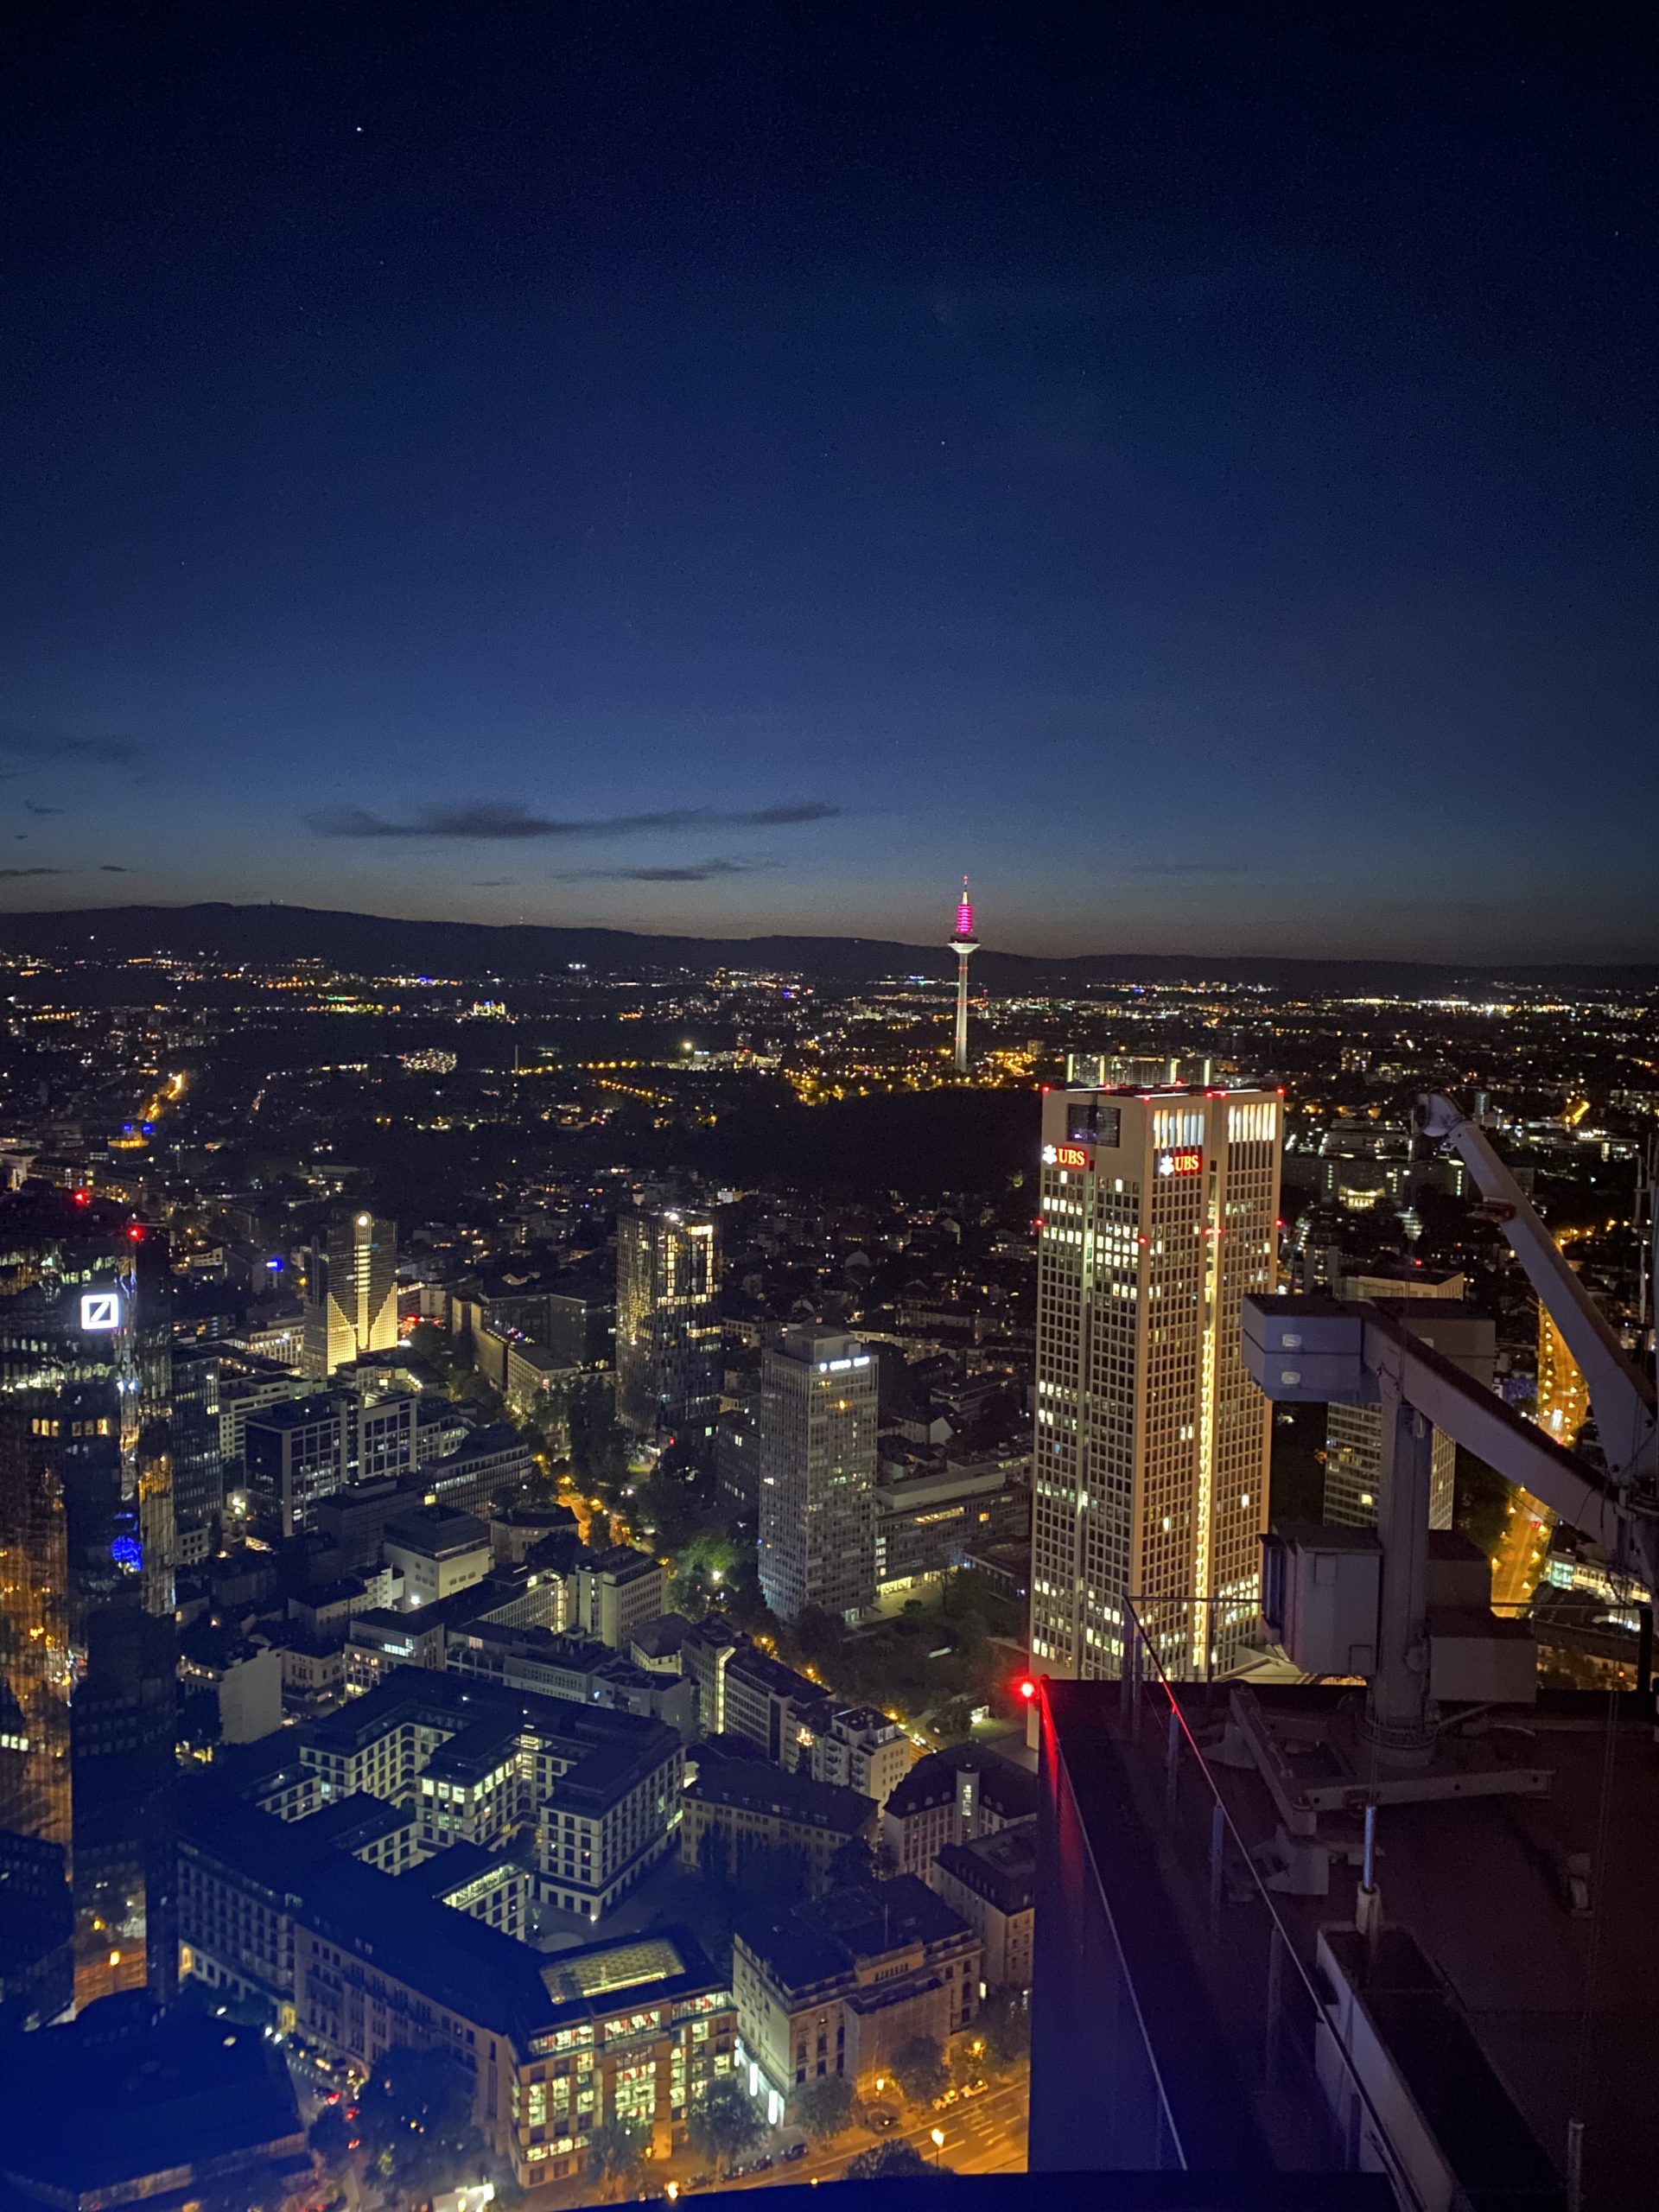 Frankfurt, Germany skyline during night time from the Maintower roof.